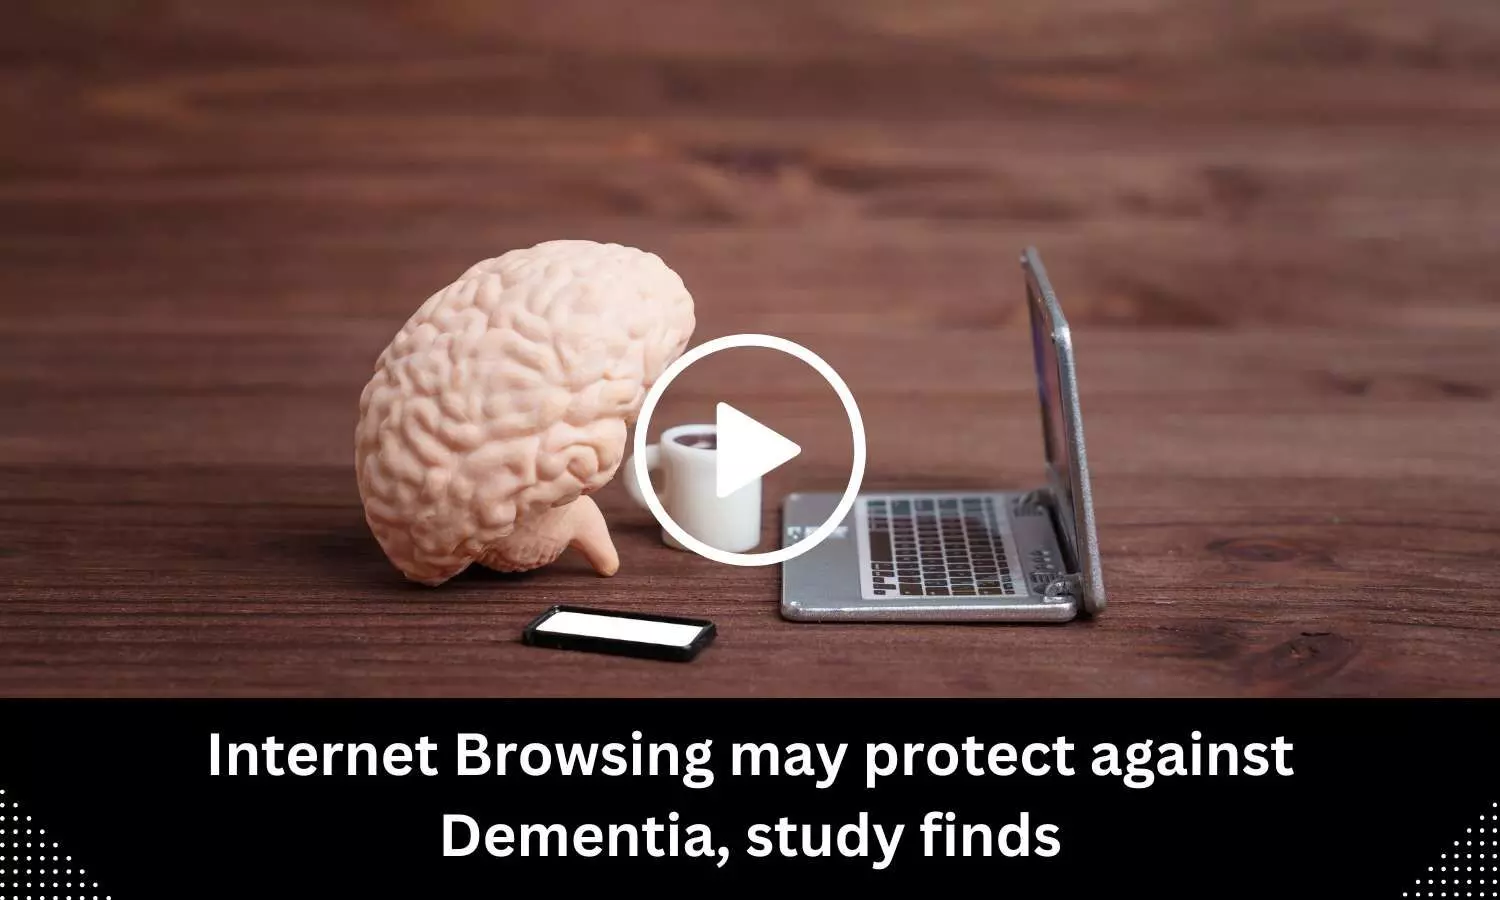 Internet Browsing may protect against Dementia, study finds